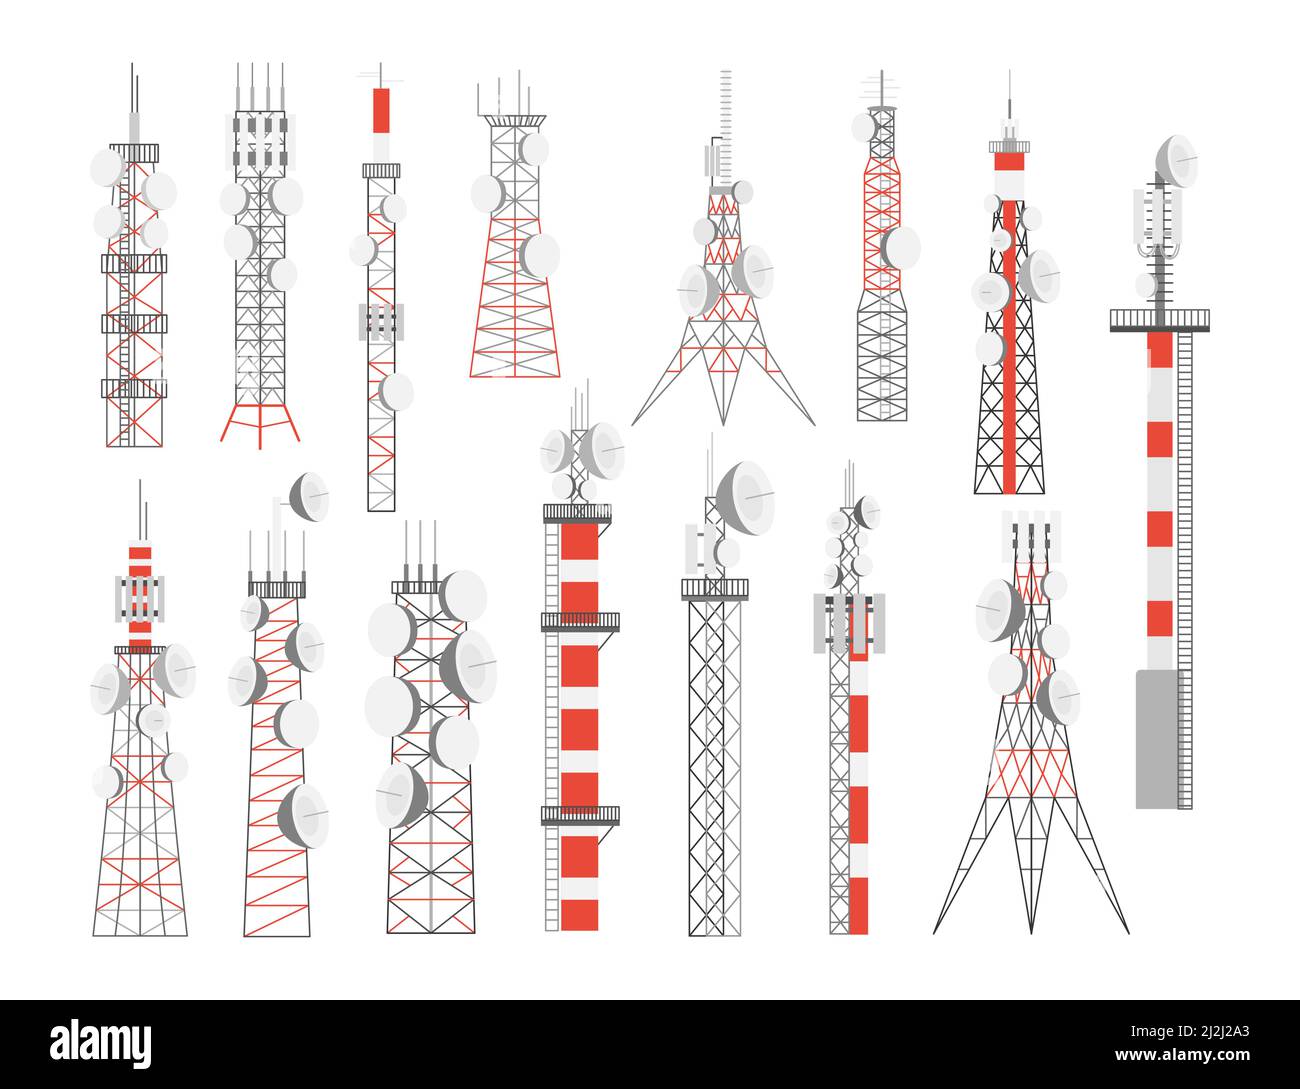 Antenna tower with satellite dishes vector illustrations set. Radio, communication or telecom transmission towers, internet, television or telephone b Stock Vector